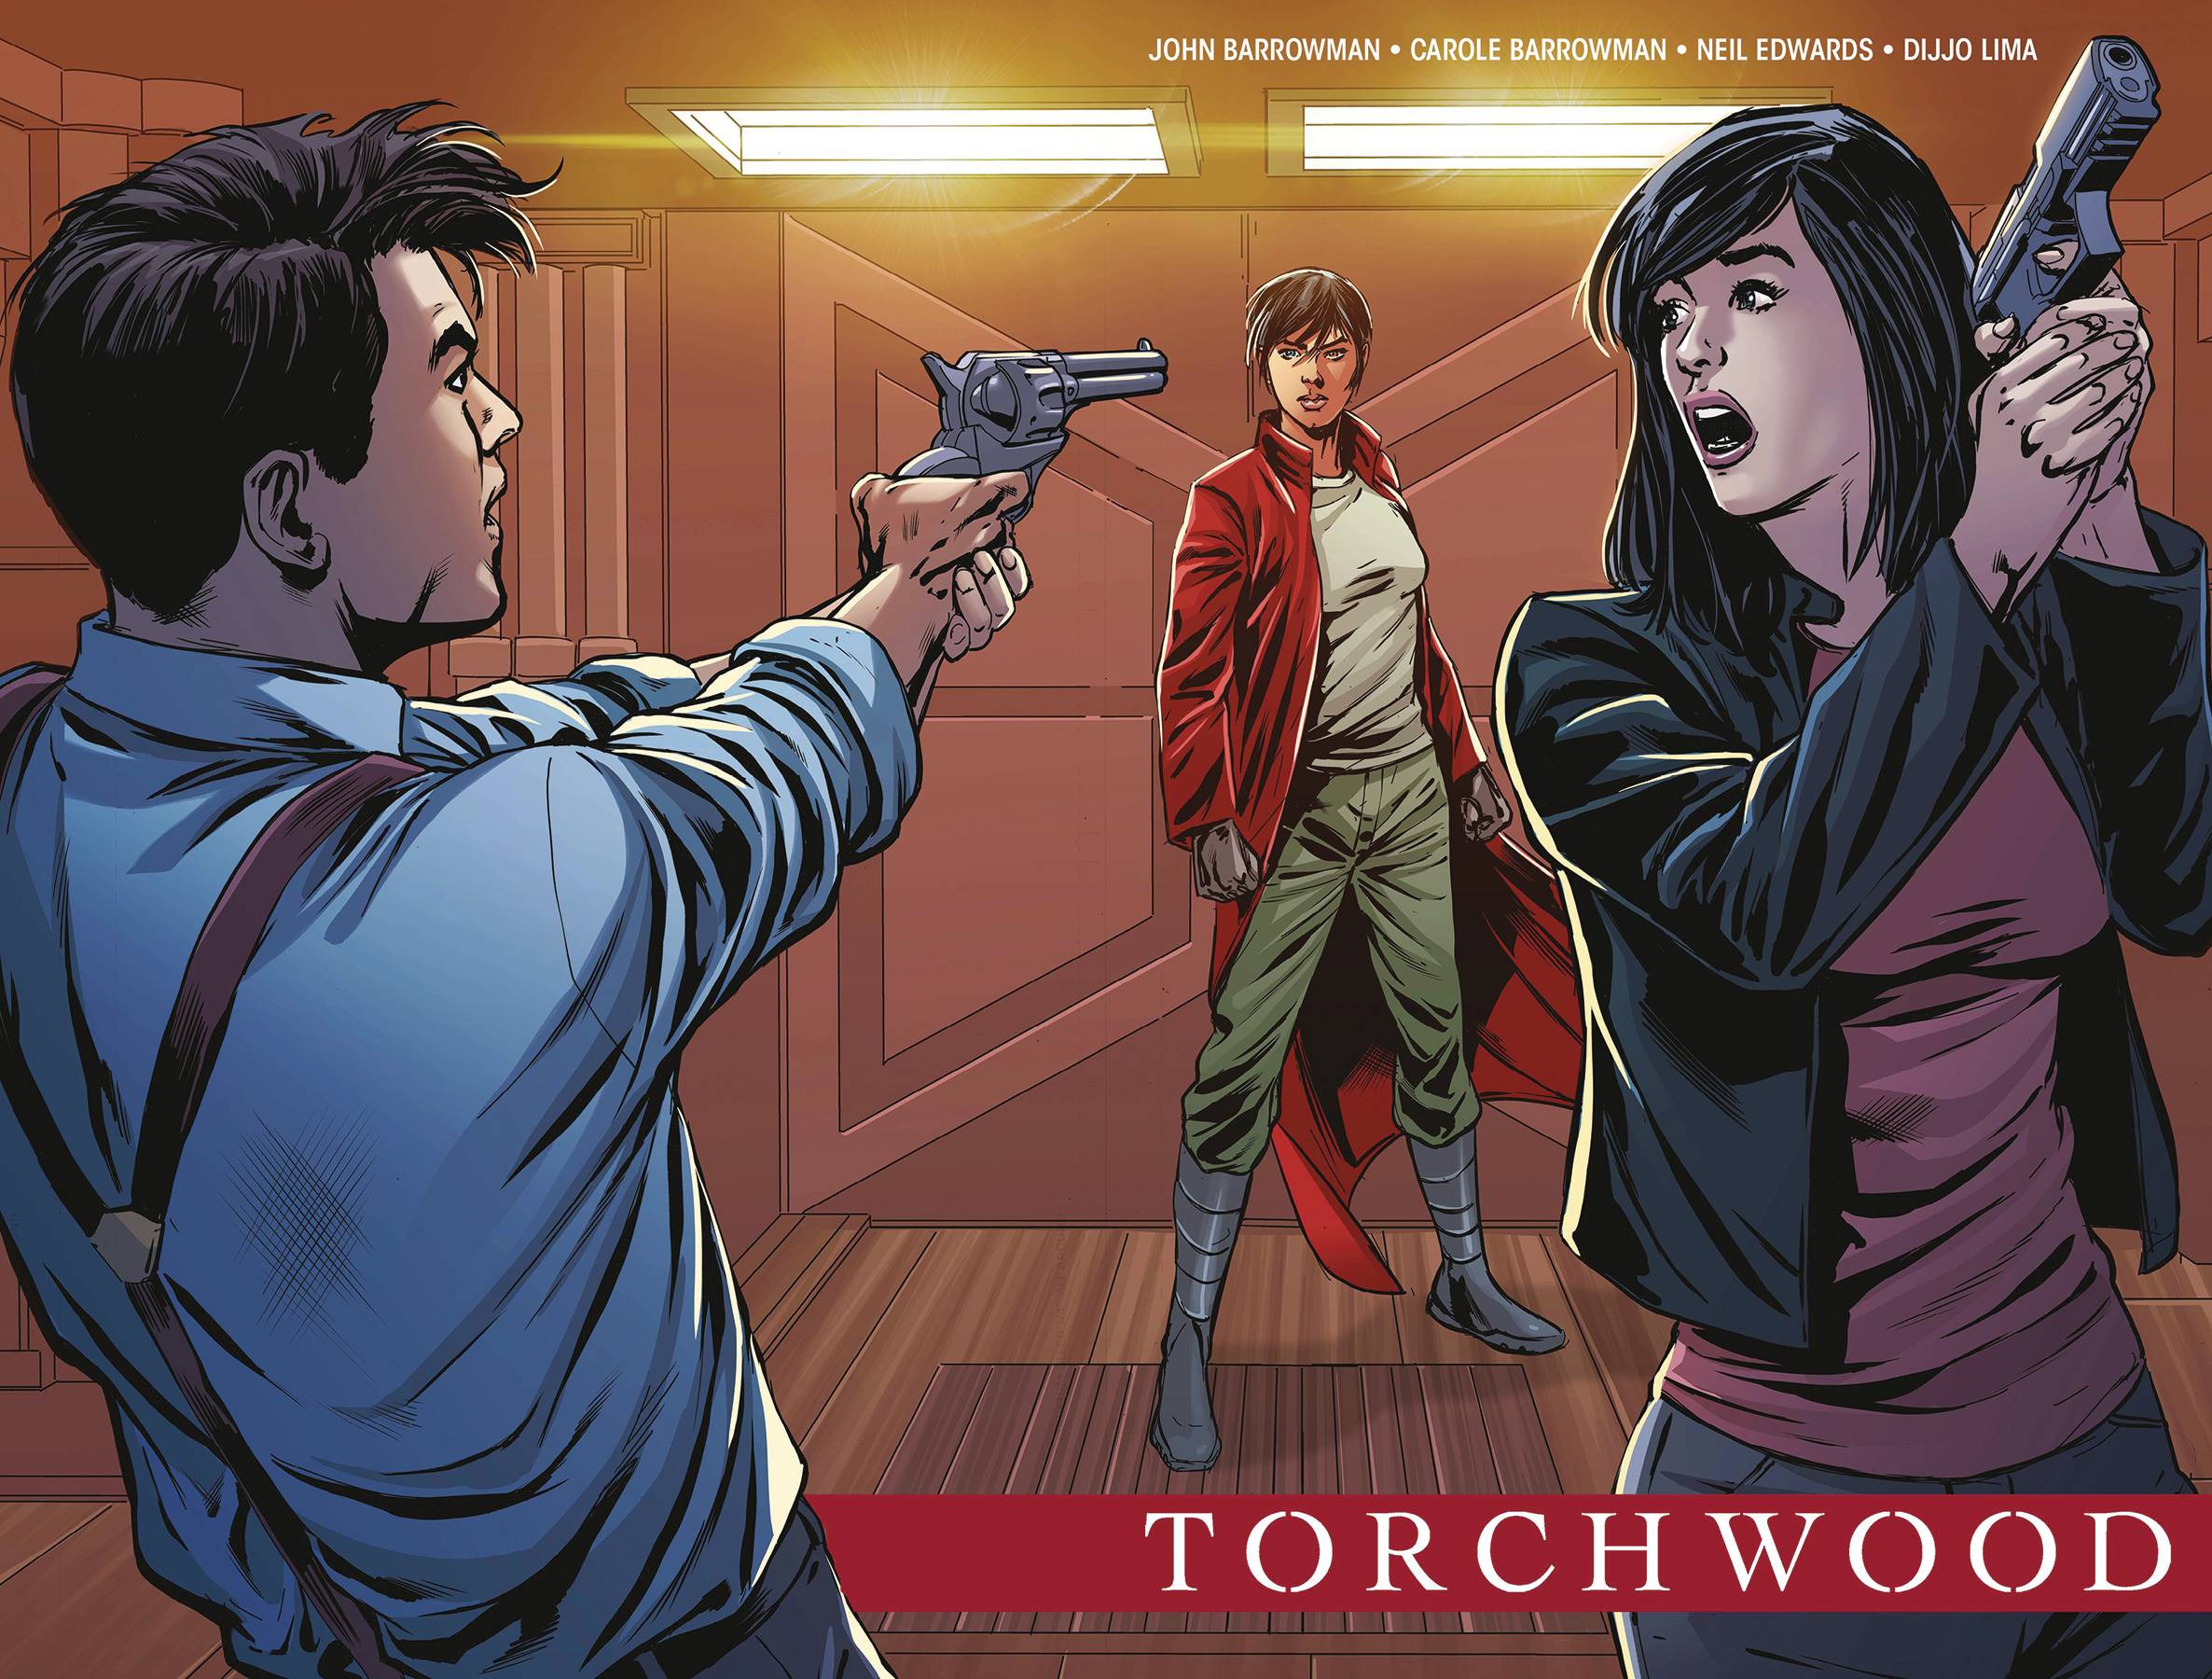 TORCHWOOD: THE CULLING#1